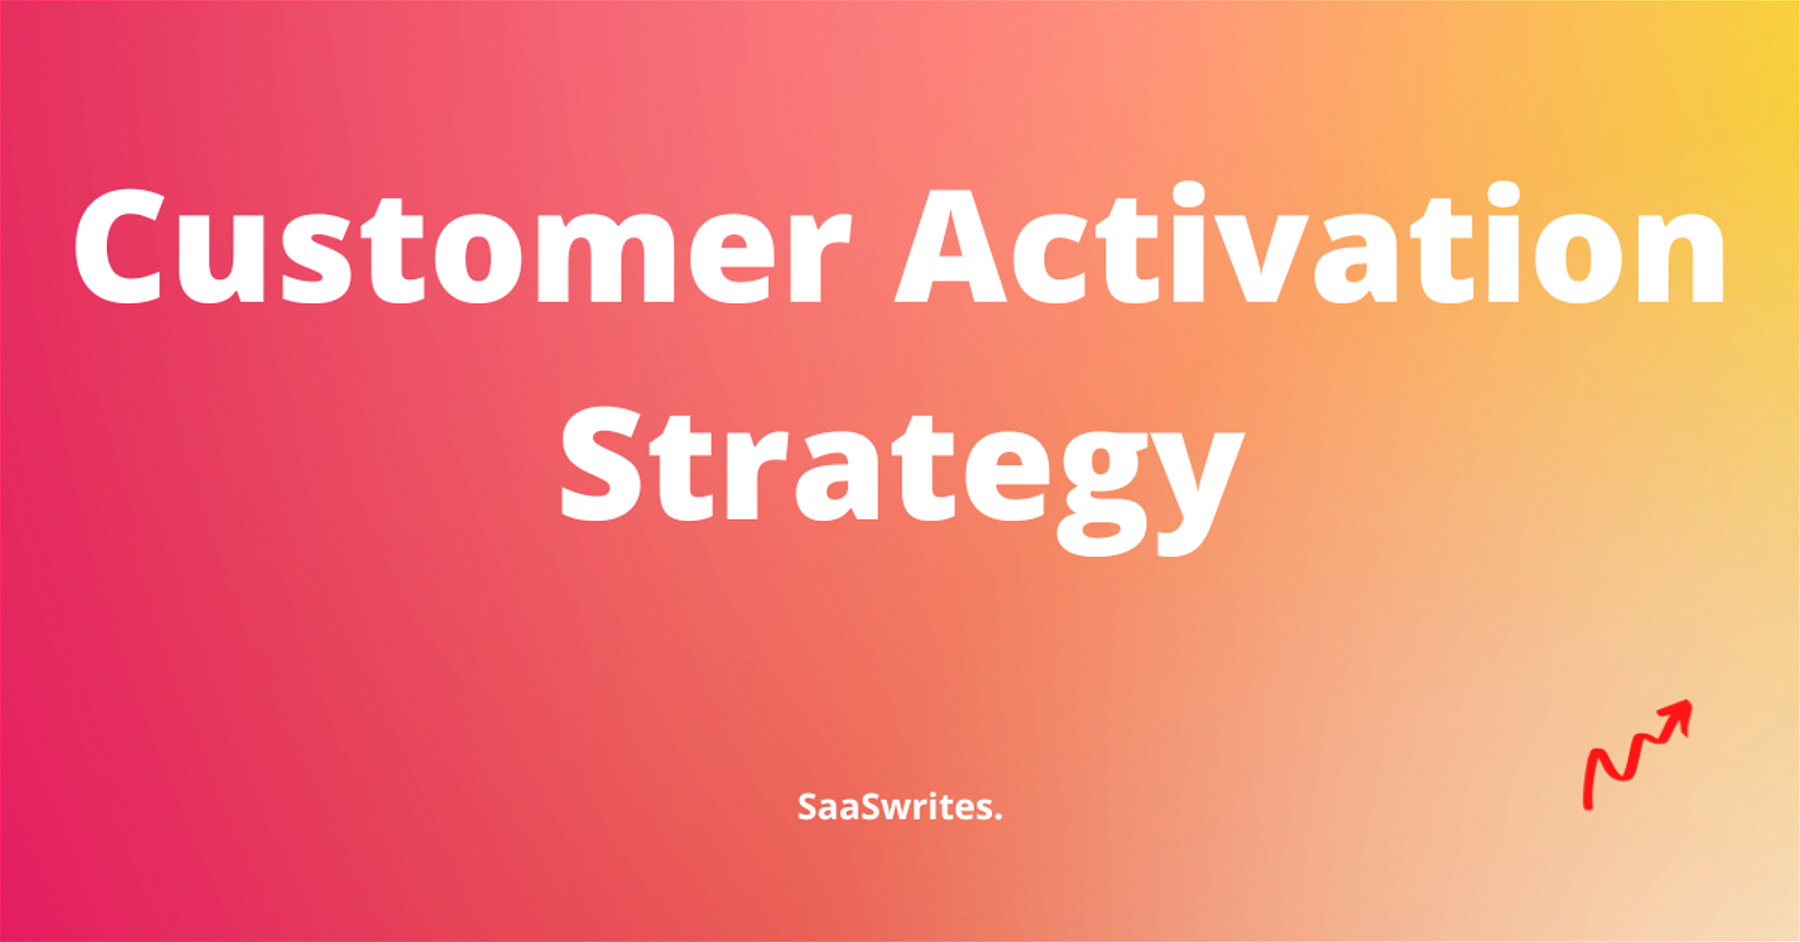 Customer Activation Strategy